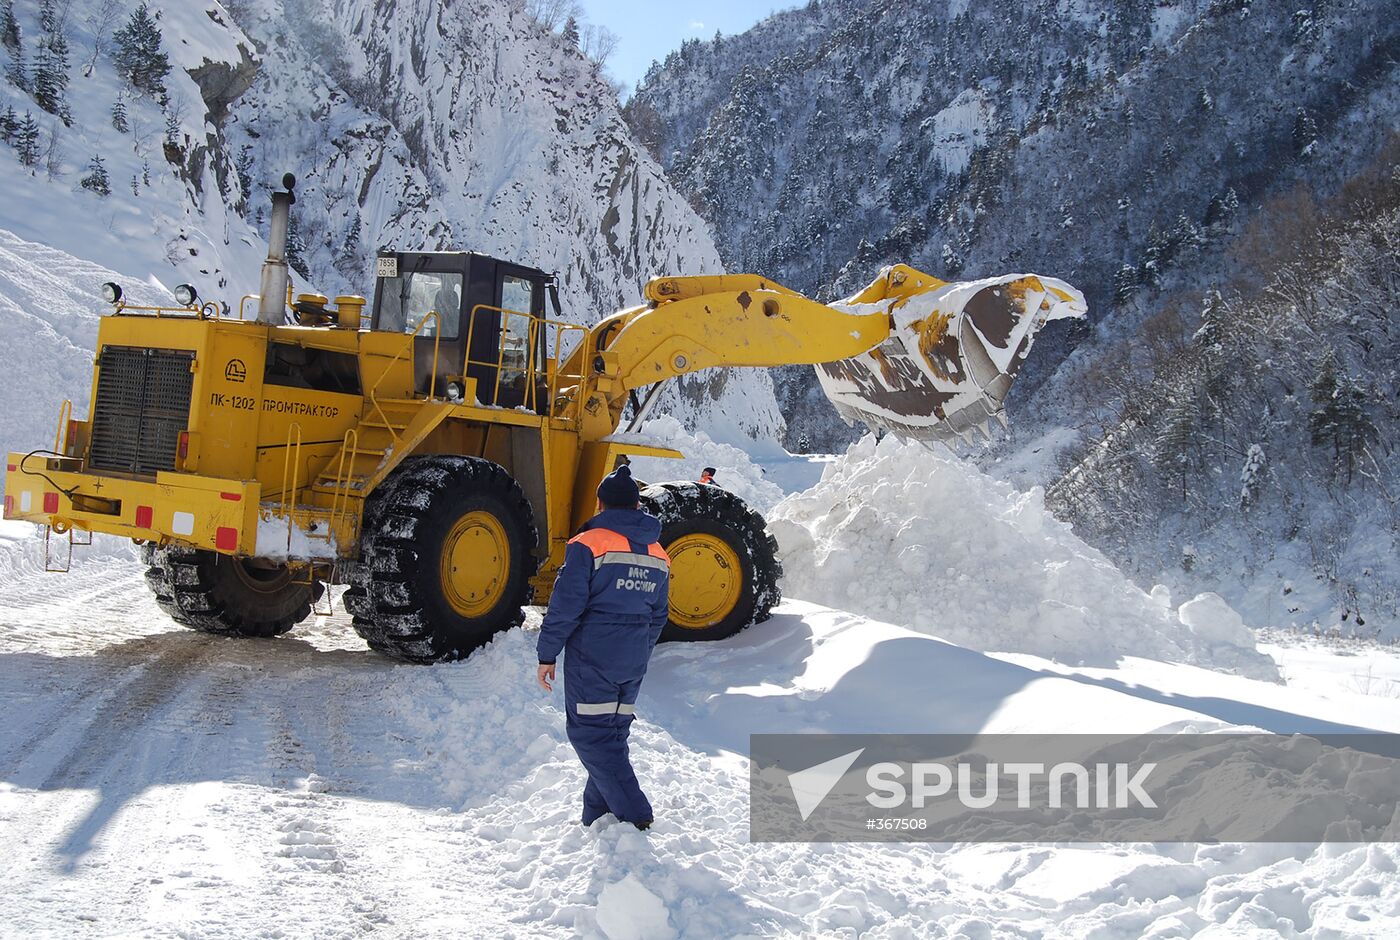 Snow clearing operations